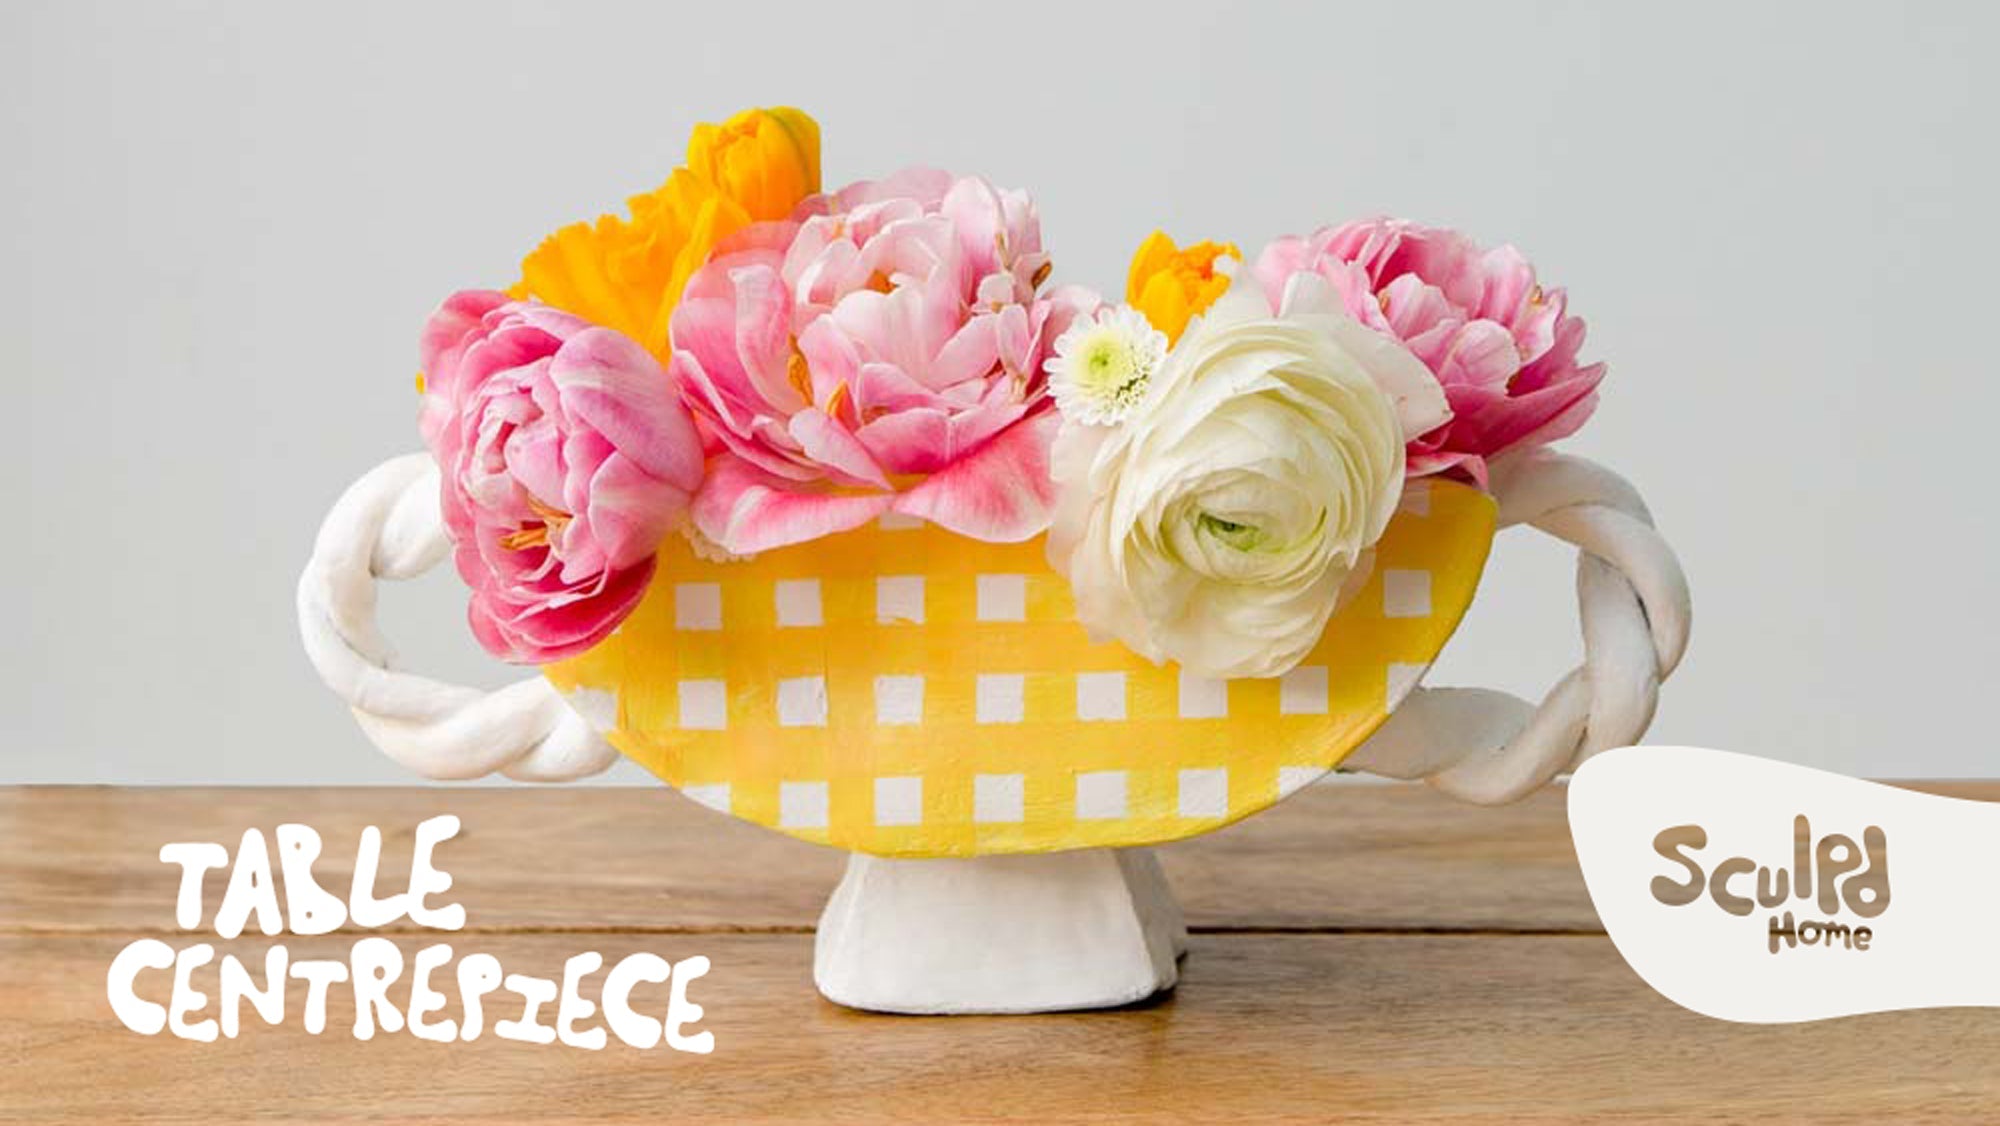 Make Your Own Table Centrepiece | By Sculpd Home